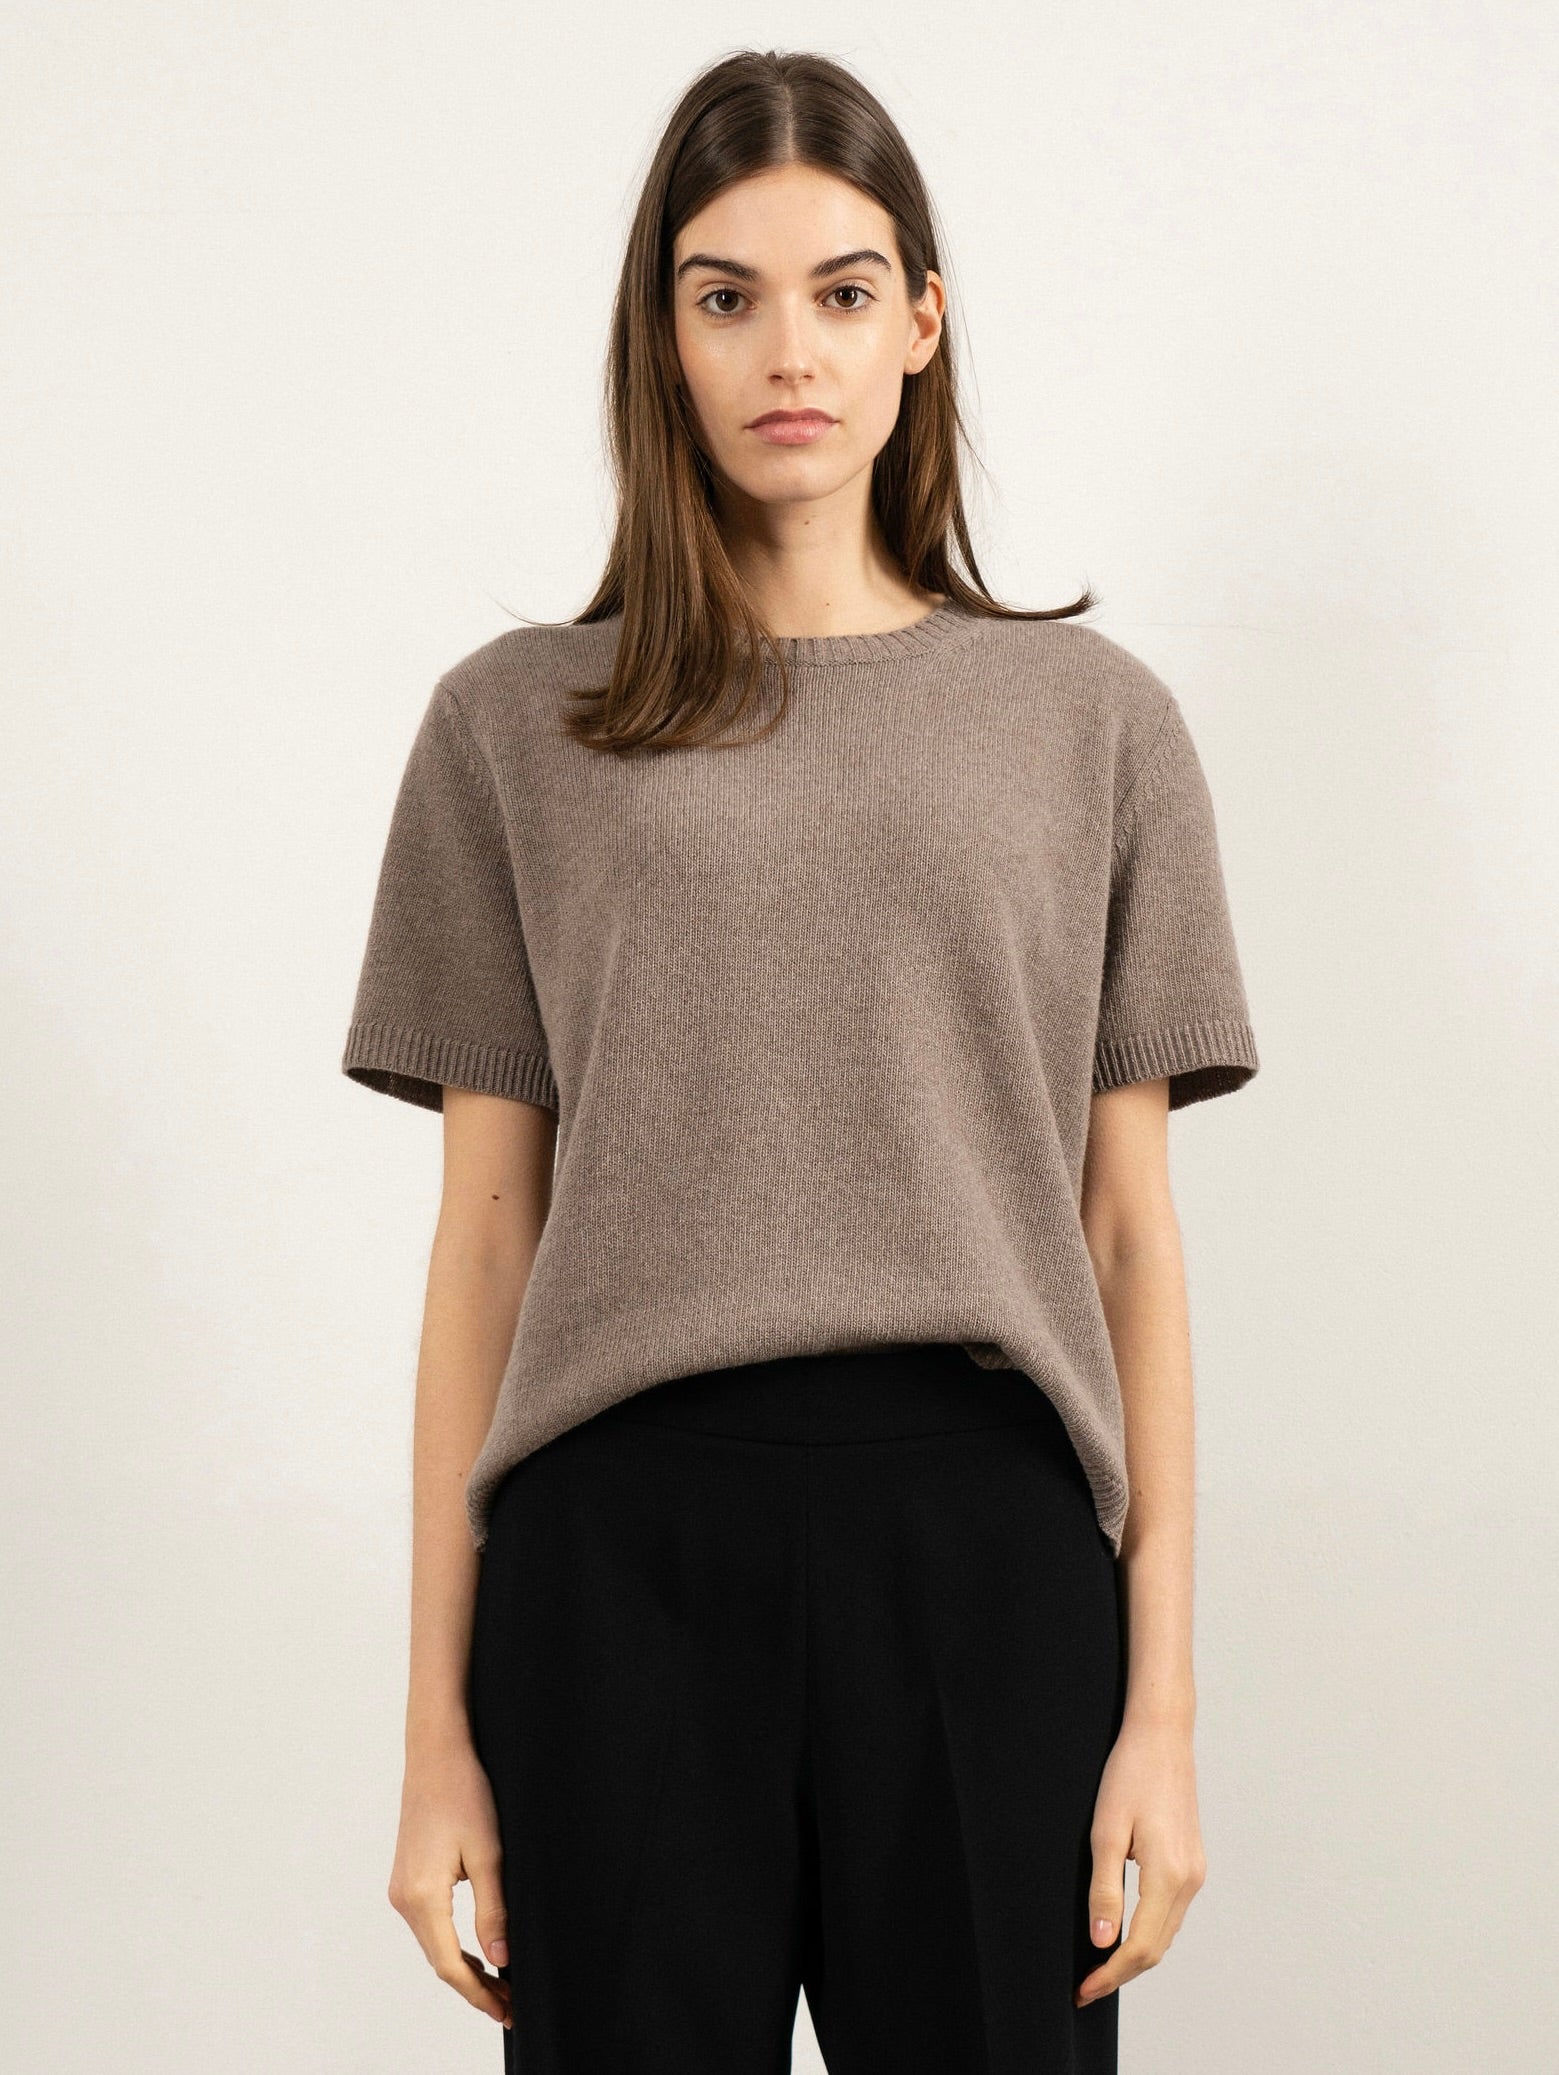 JULES SWEATER IN TIMELESS TAUPE